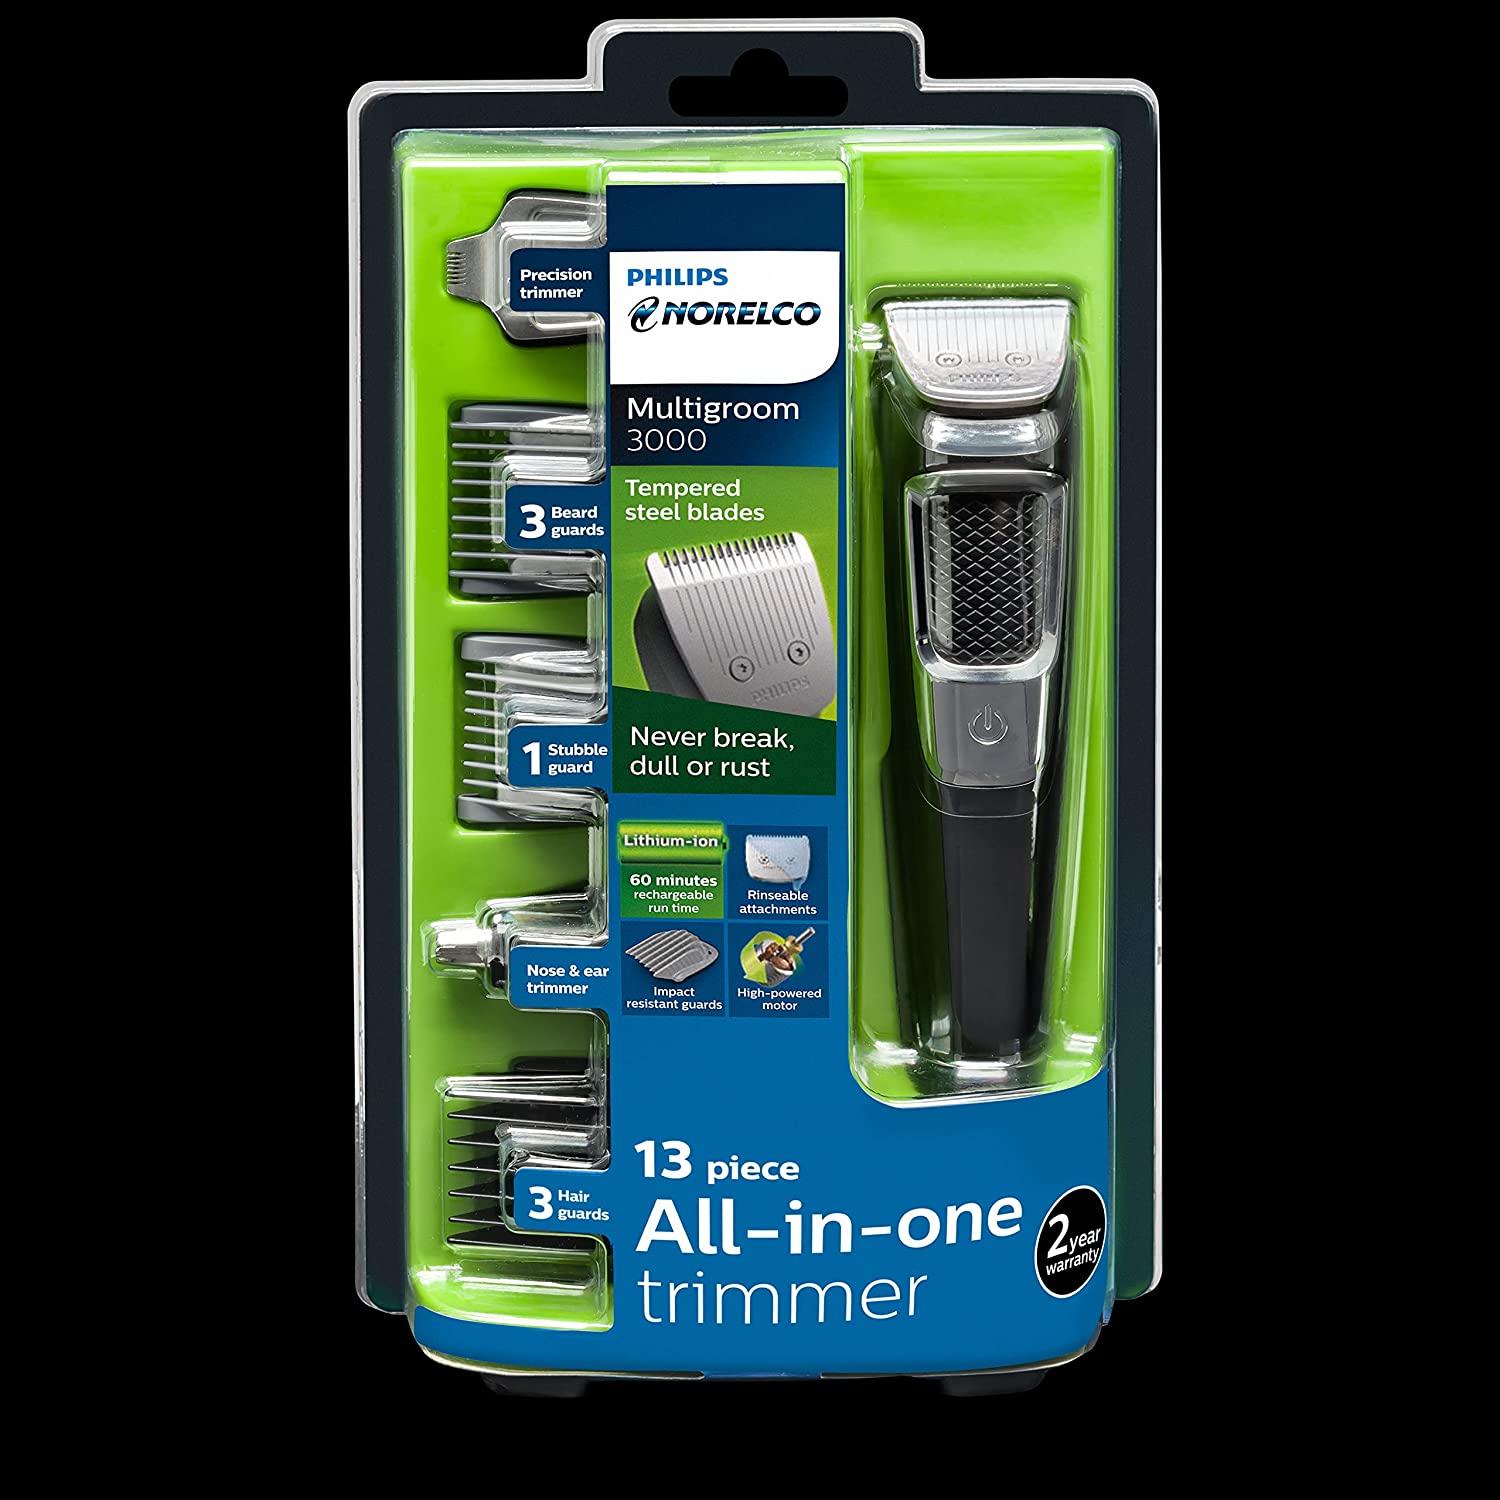 Philips Multigroomer Norelco Piece Series 13 3000, Trimmer All-in-One